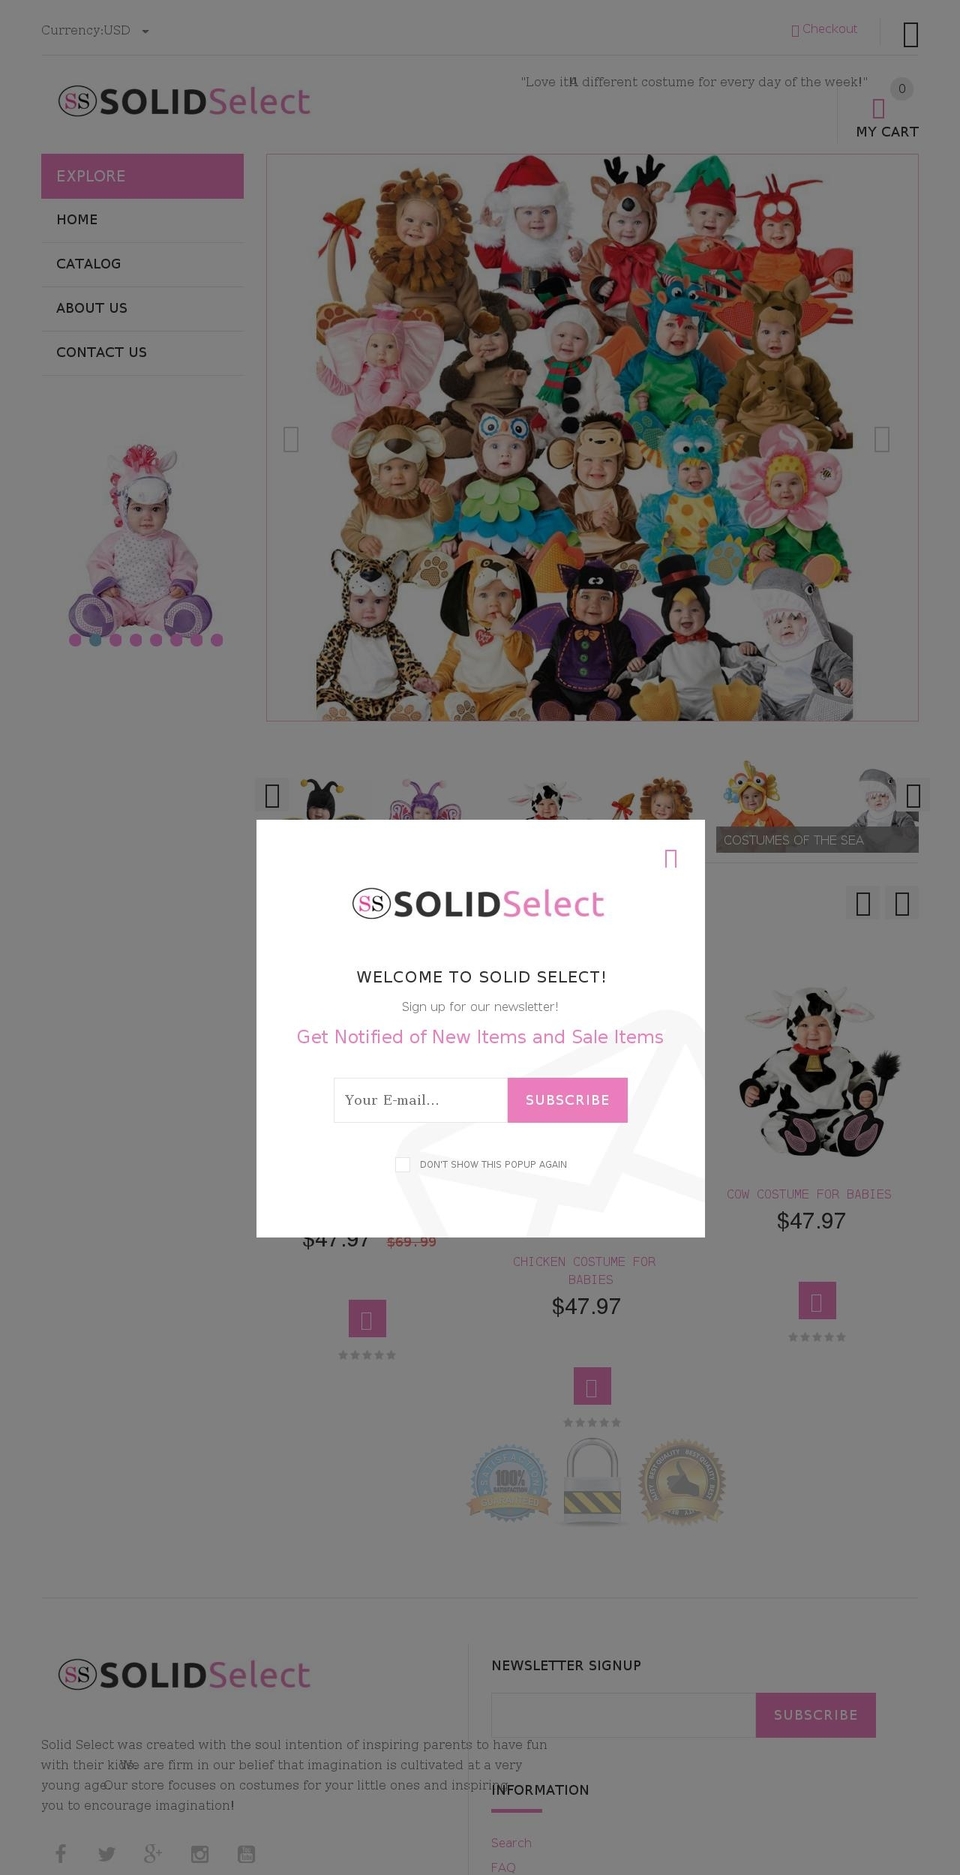 YourStore Shopify theme site example solidselect.net